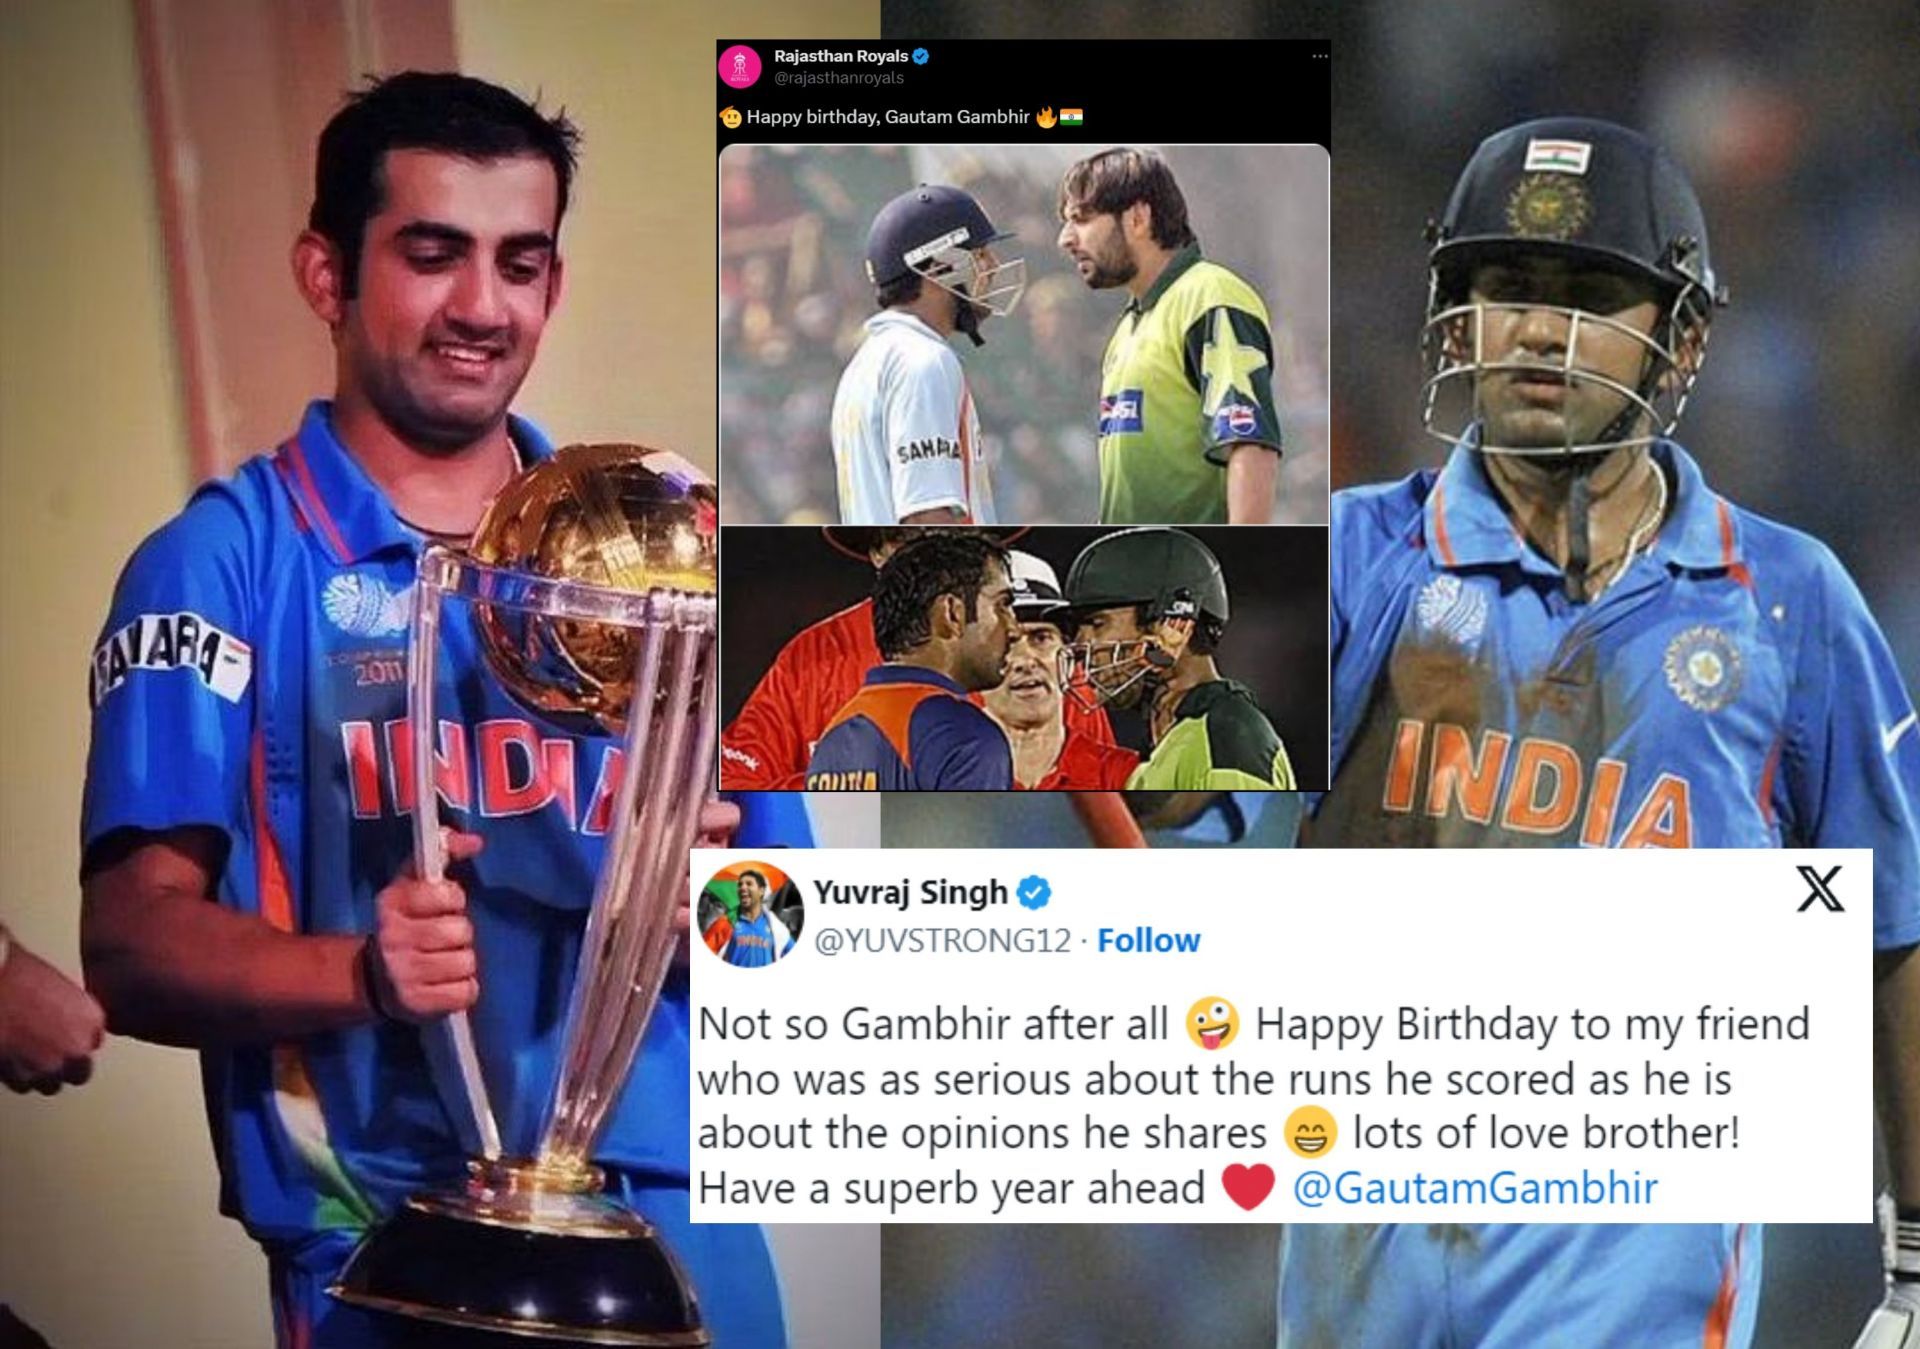 Gautam Gambhir received special wishes on Saturday as he turned 42